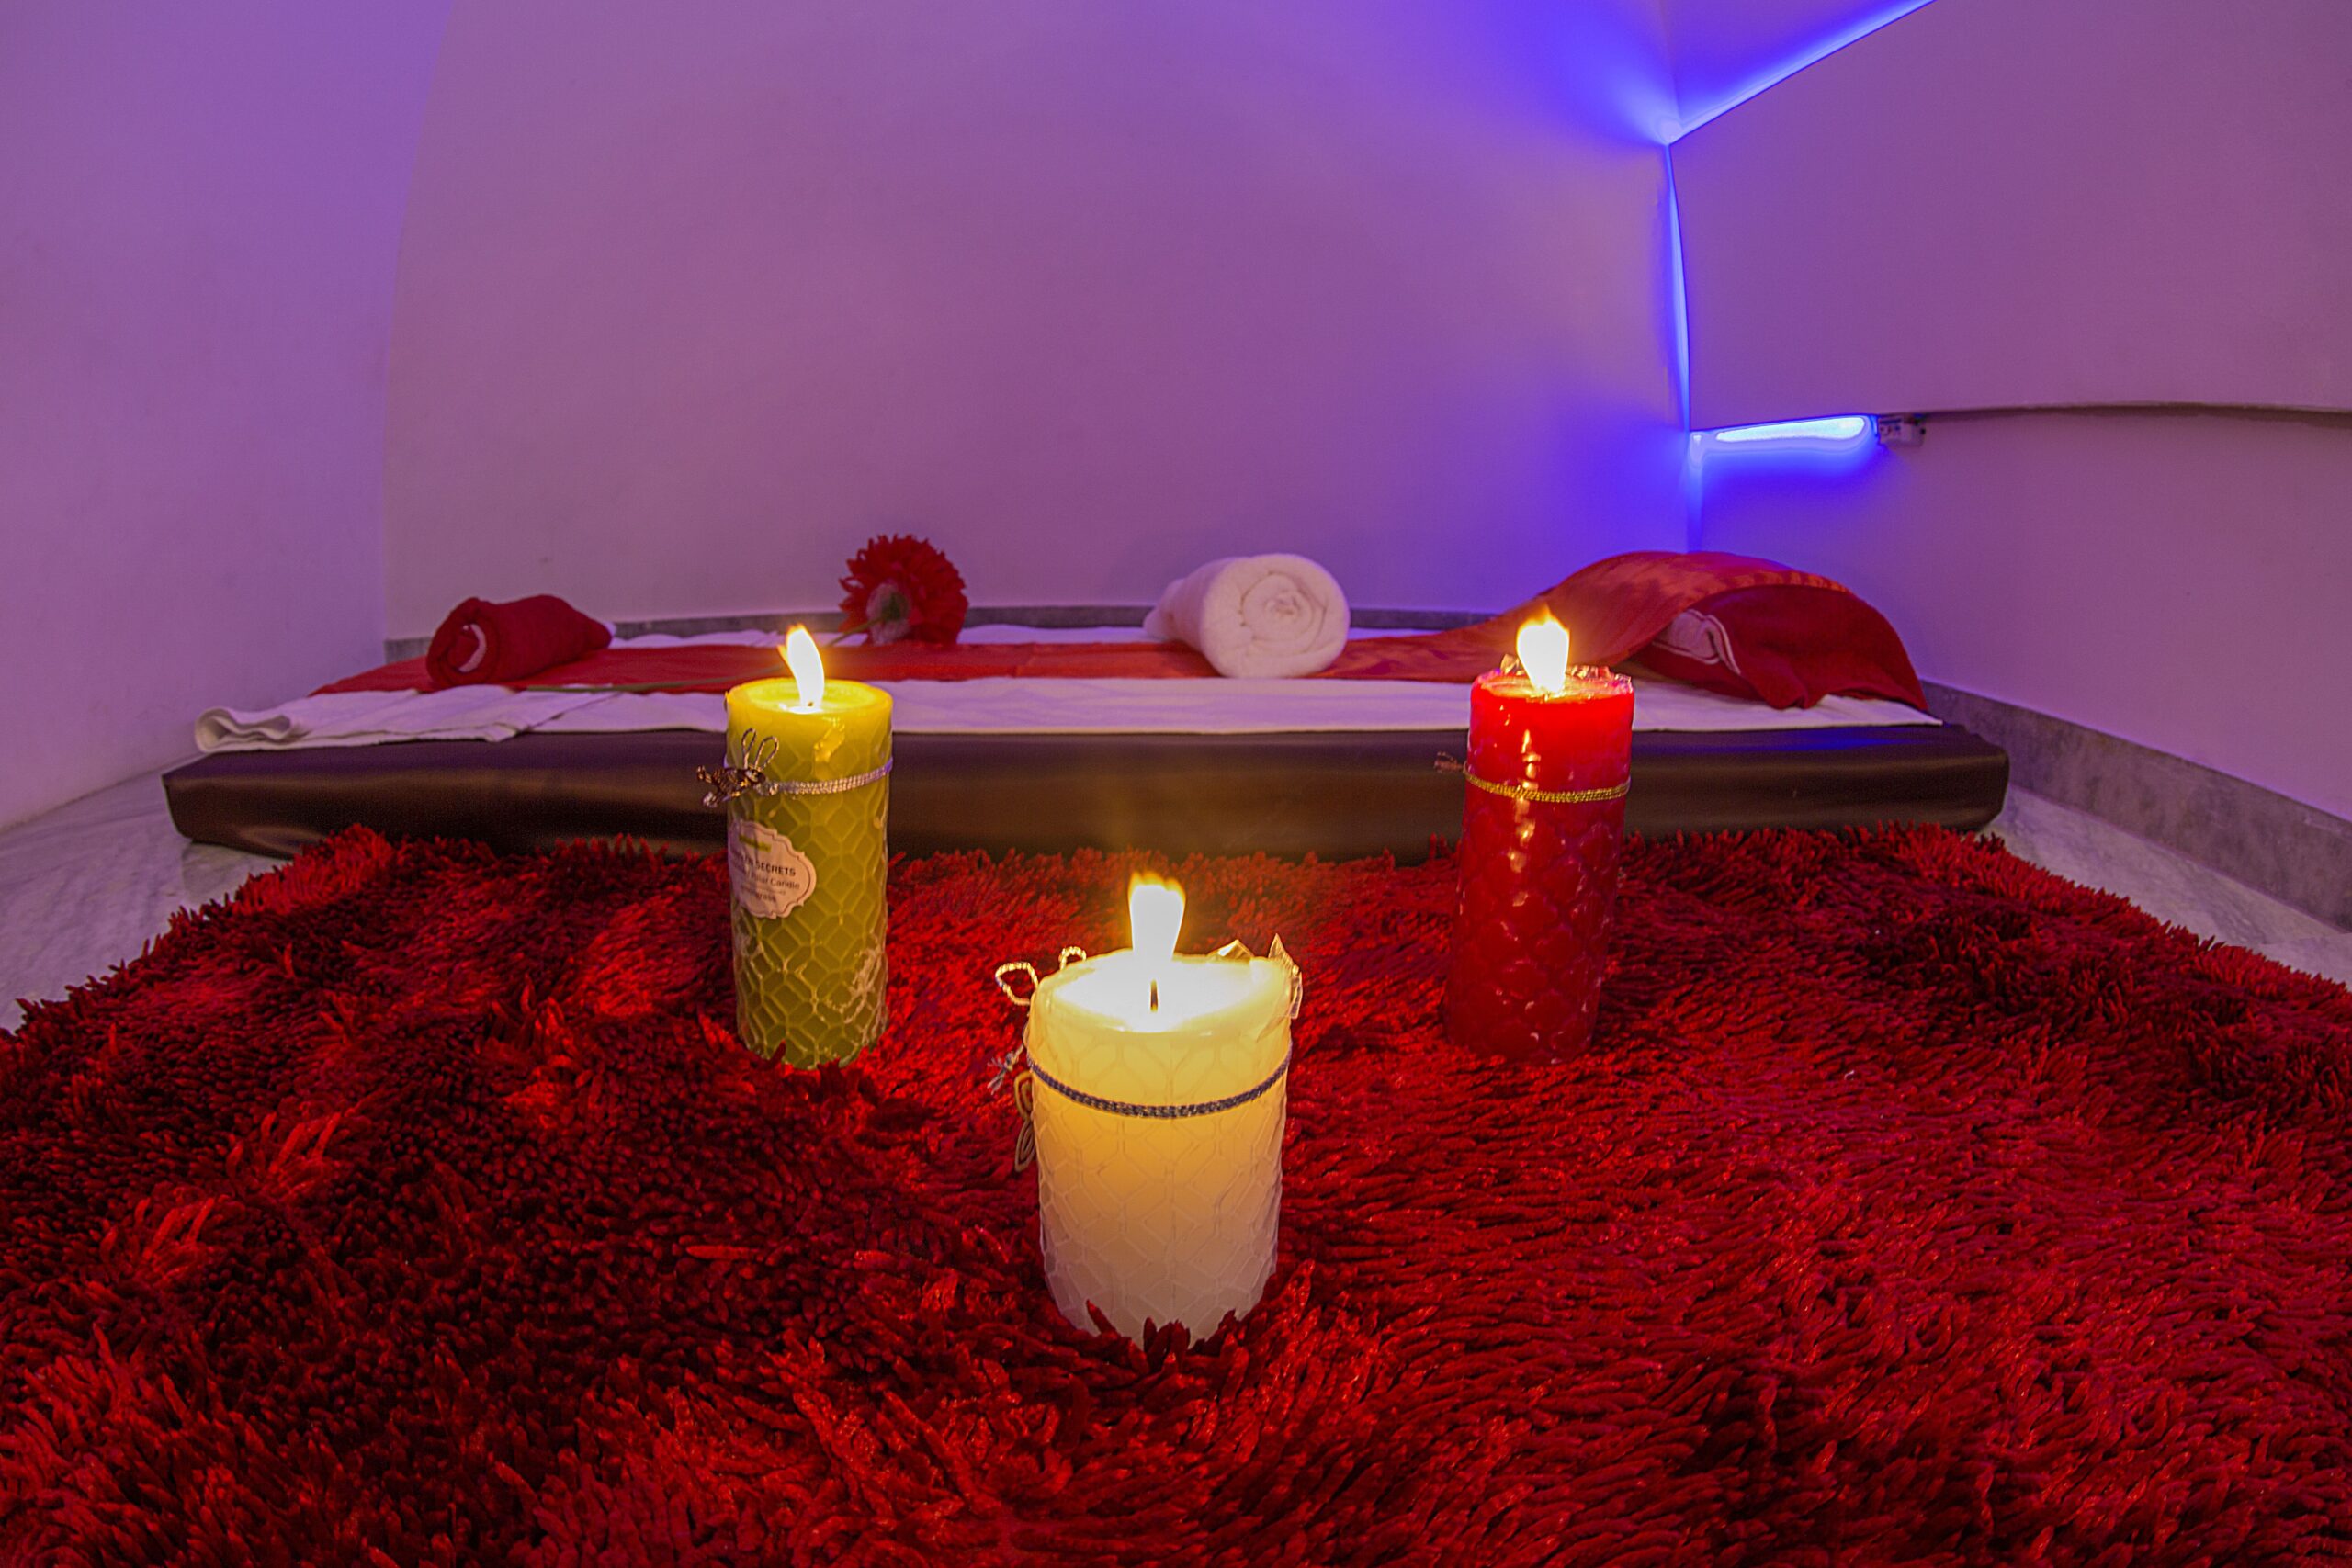 A closer view of a relaxed massage room in a spa with a flat bed and towels rolled on into it A beautiful red colour rug with different coloured big candles lighten up. A mild light in the background gives a pleasant environment.